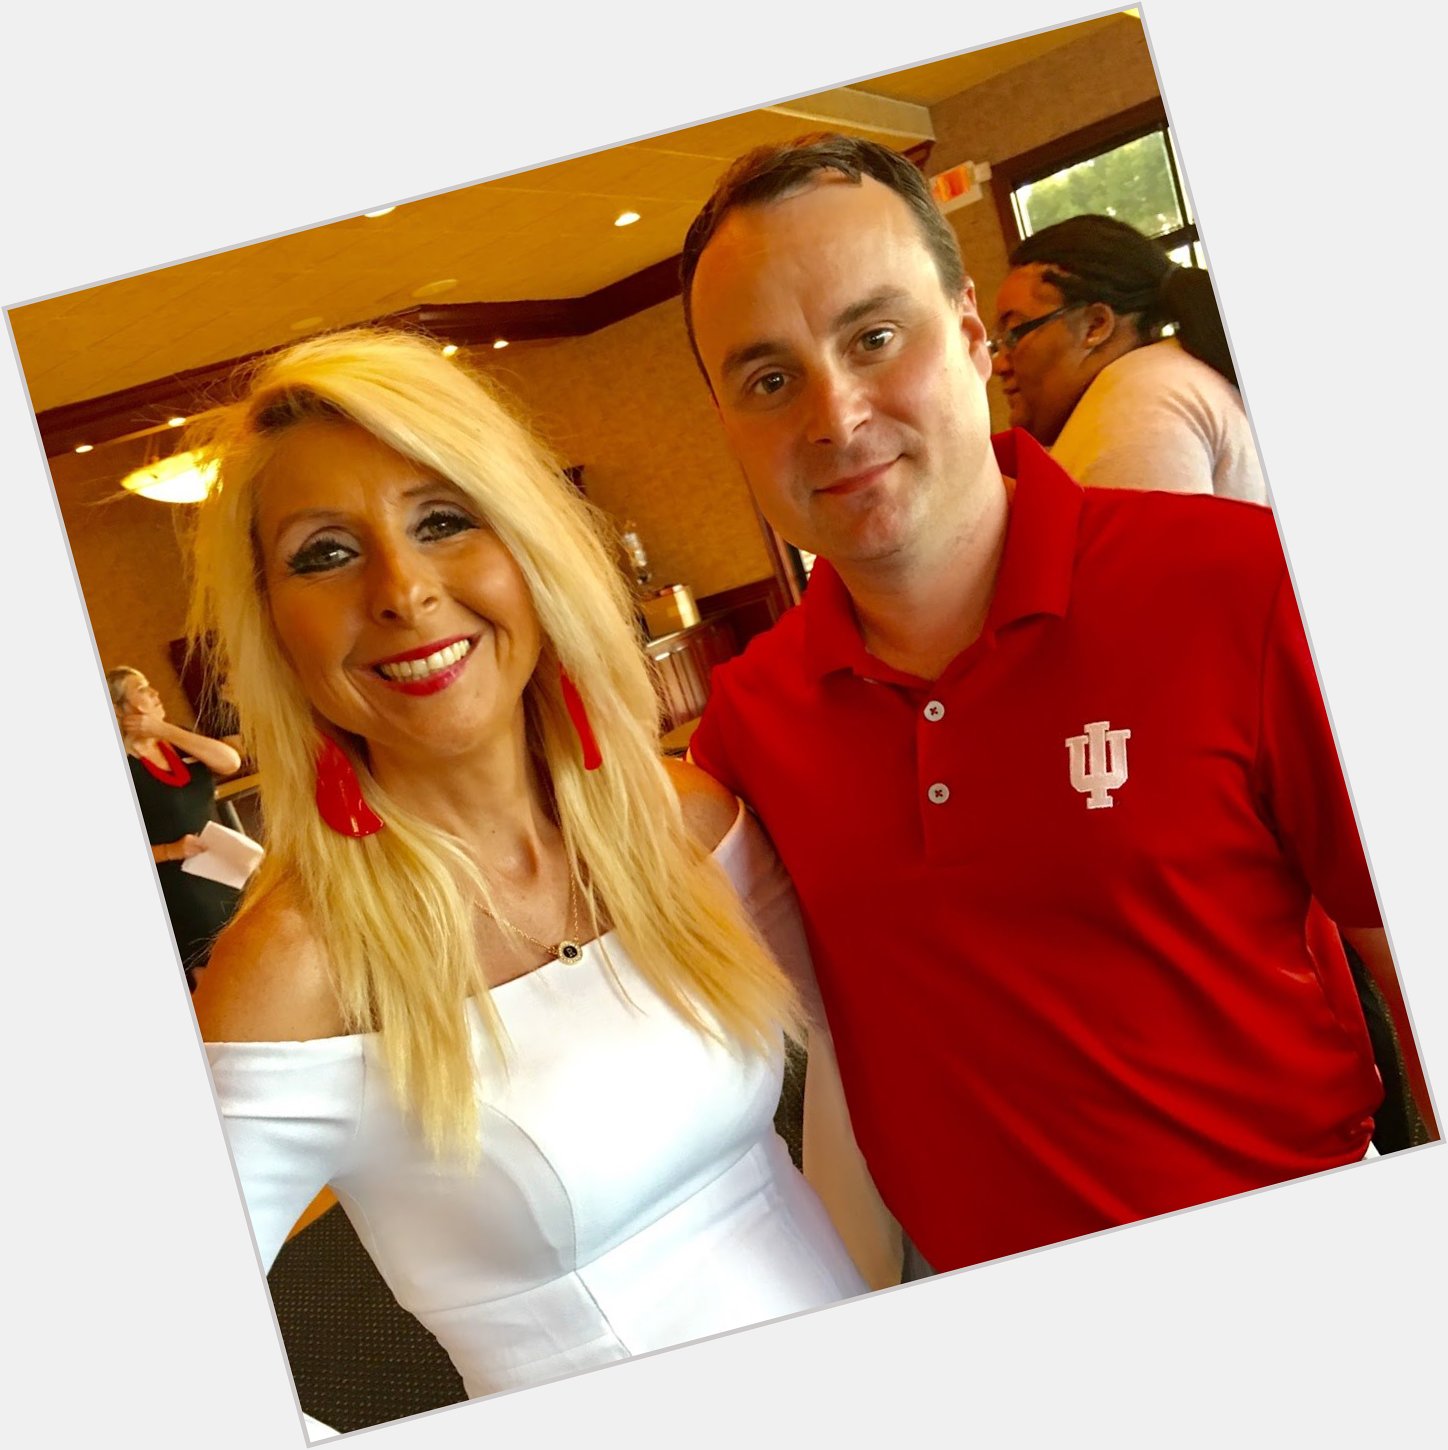 Happy Birthday Coach - Go Hoosiers and have a wonderful day! 